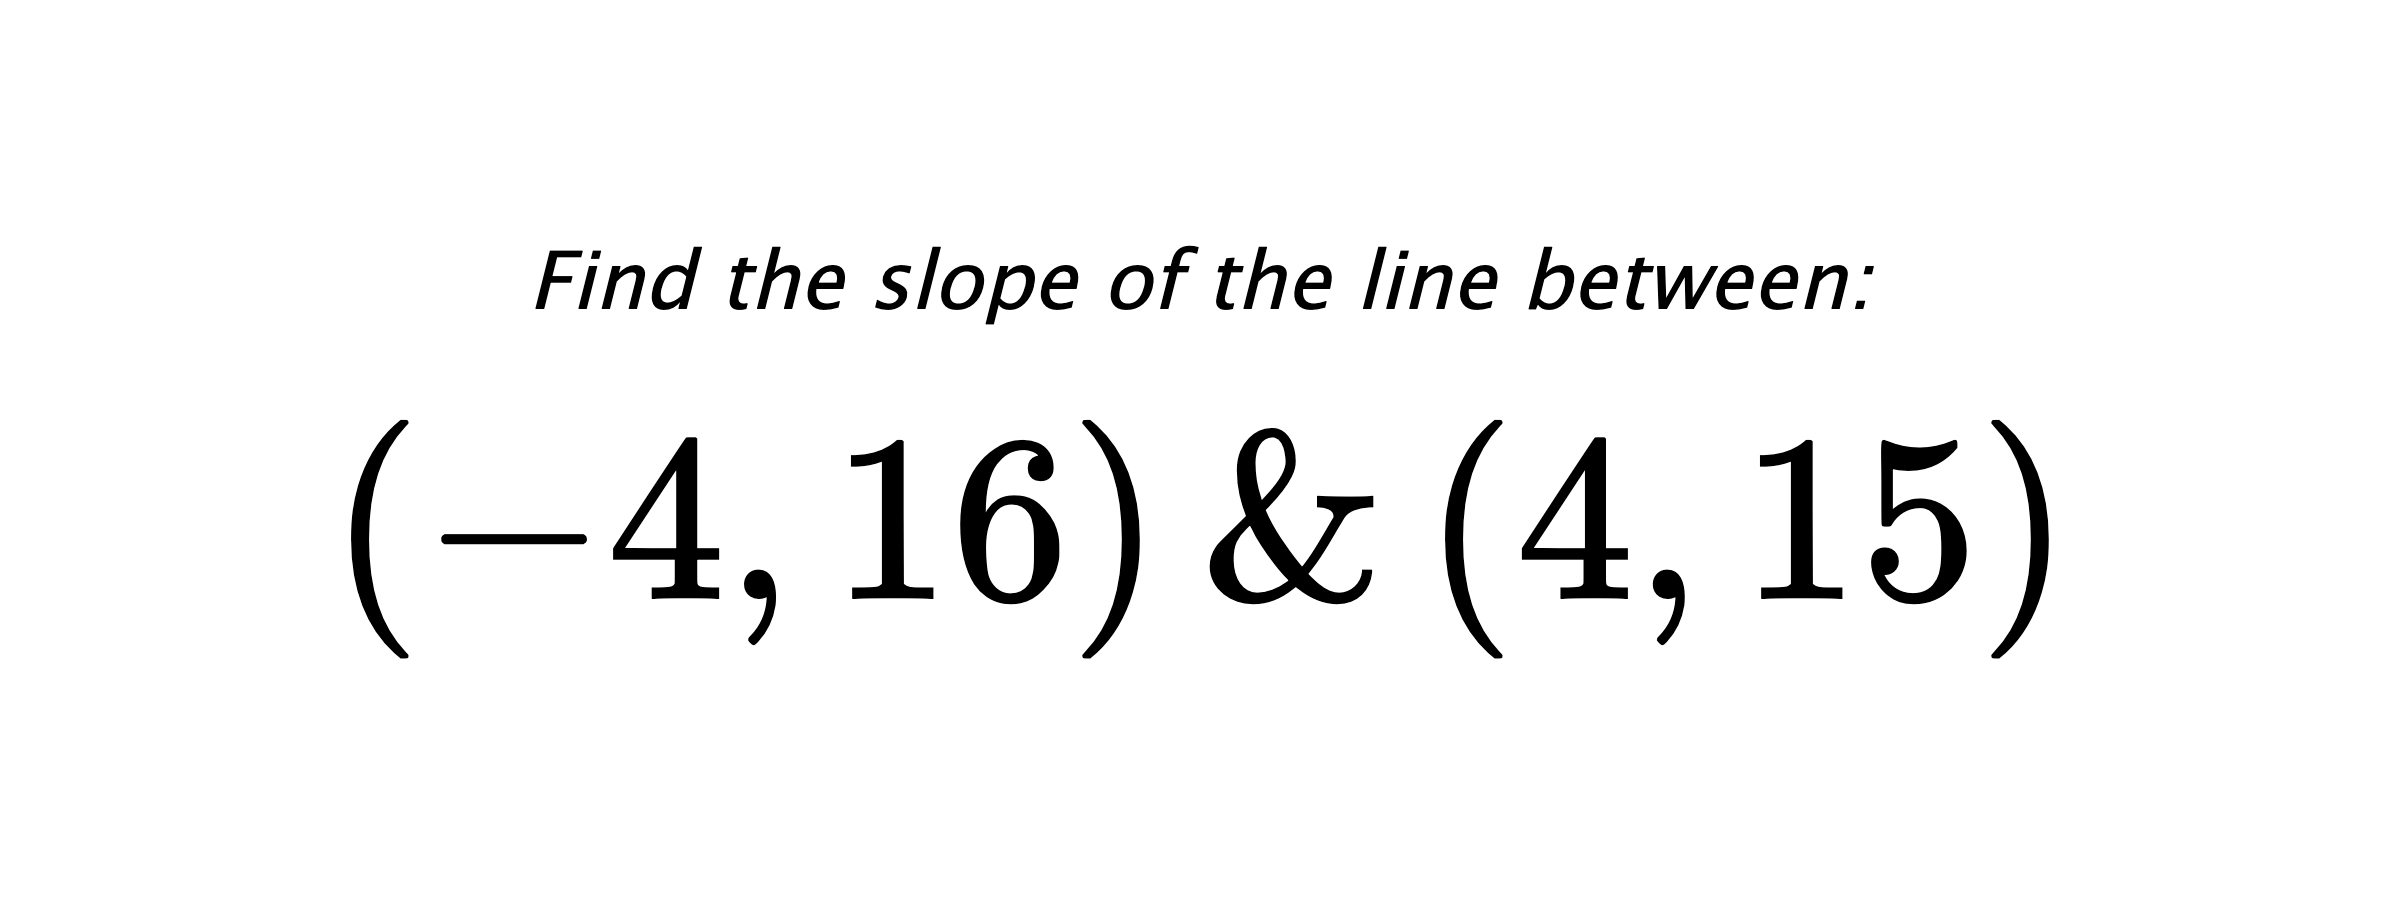 Find the slope of the line between: $ (-4,16) \hspace{0.5cm} \text{&} \hspace{0.5cm} (4,15) $